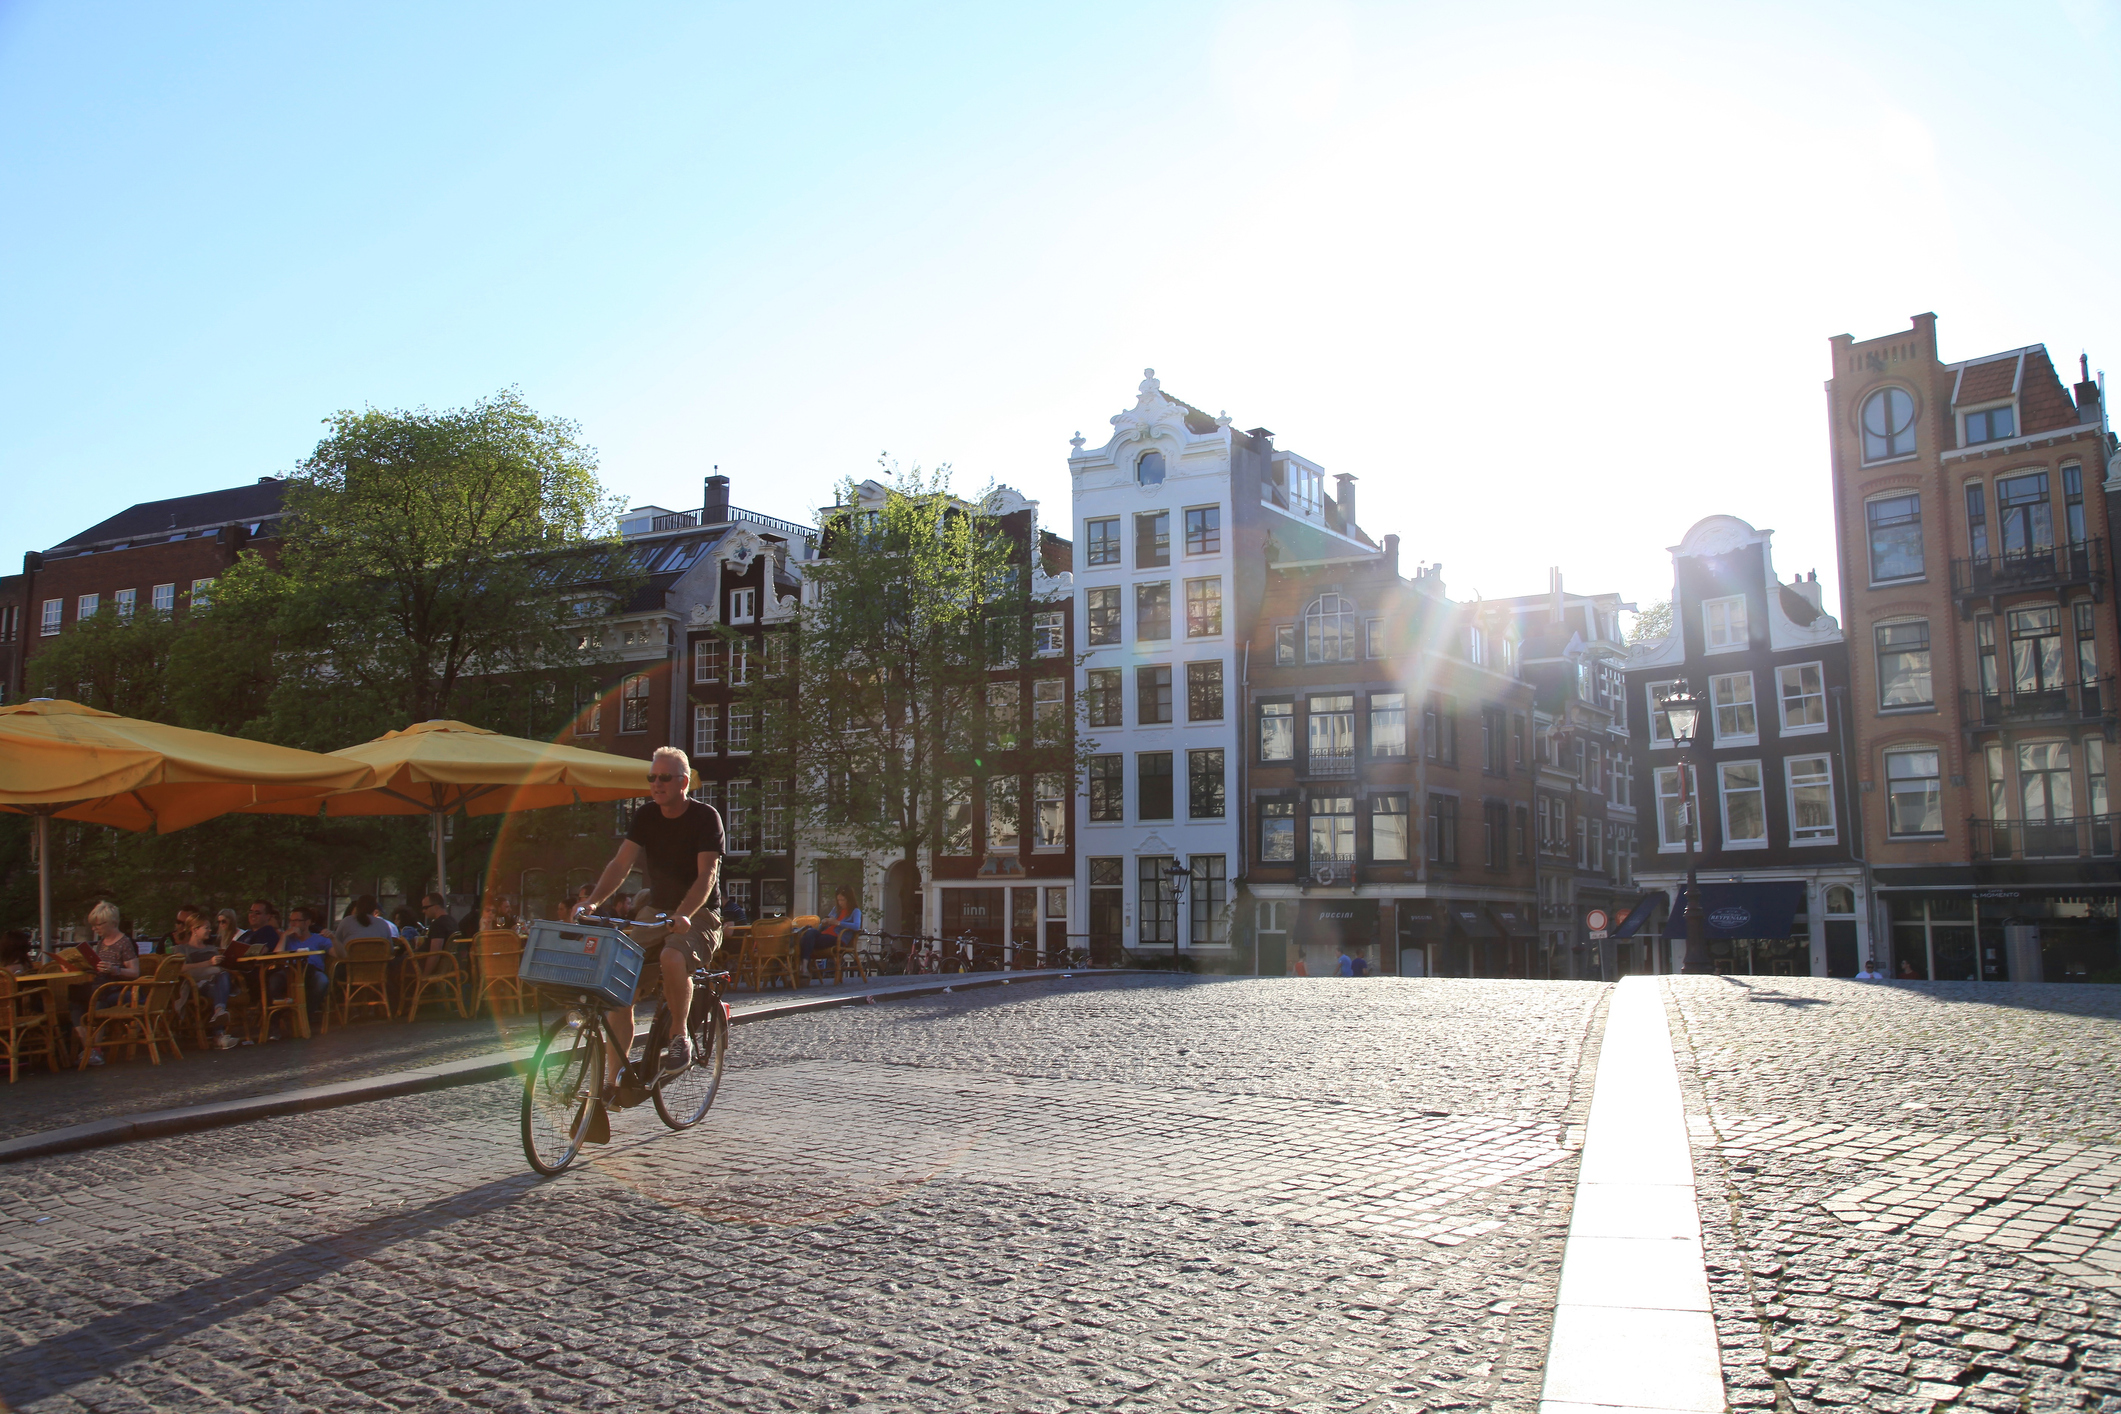 Amsterdam, Netherlands - May 8, 2016: Street scene with bicycle rider on cobblestone bridge in the afternoon sunlight, Amsterdam, Netherlands.